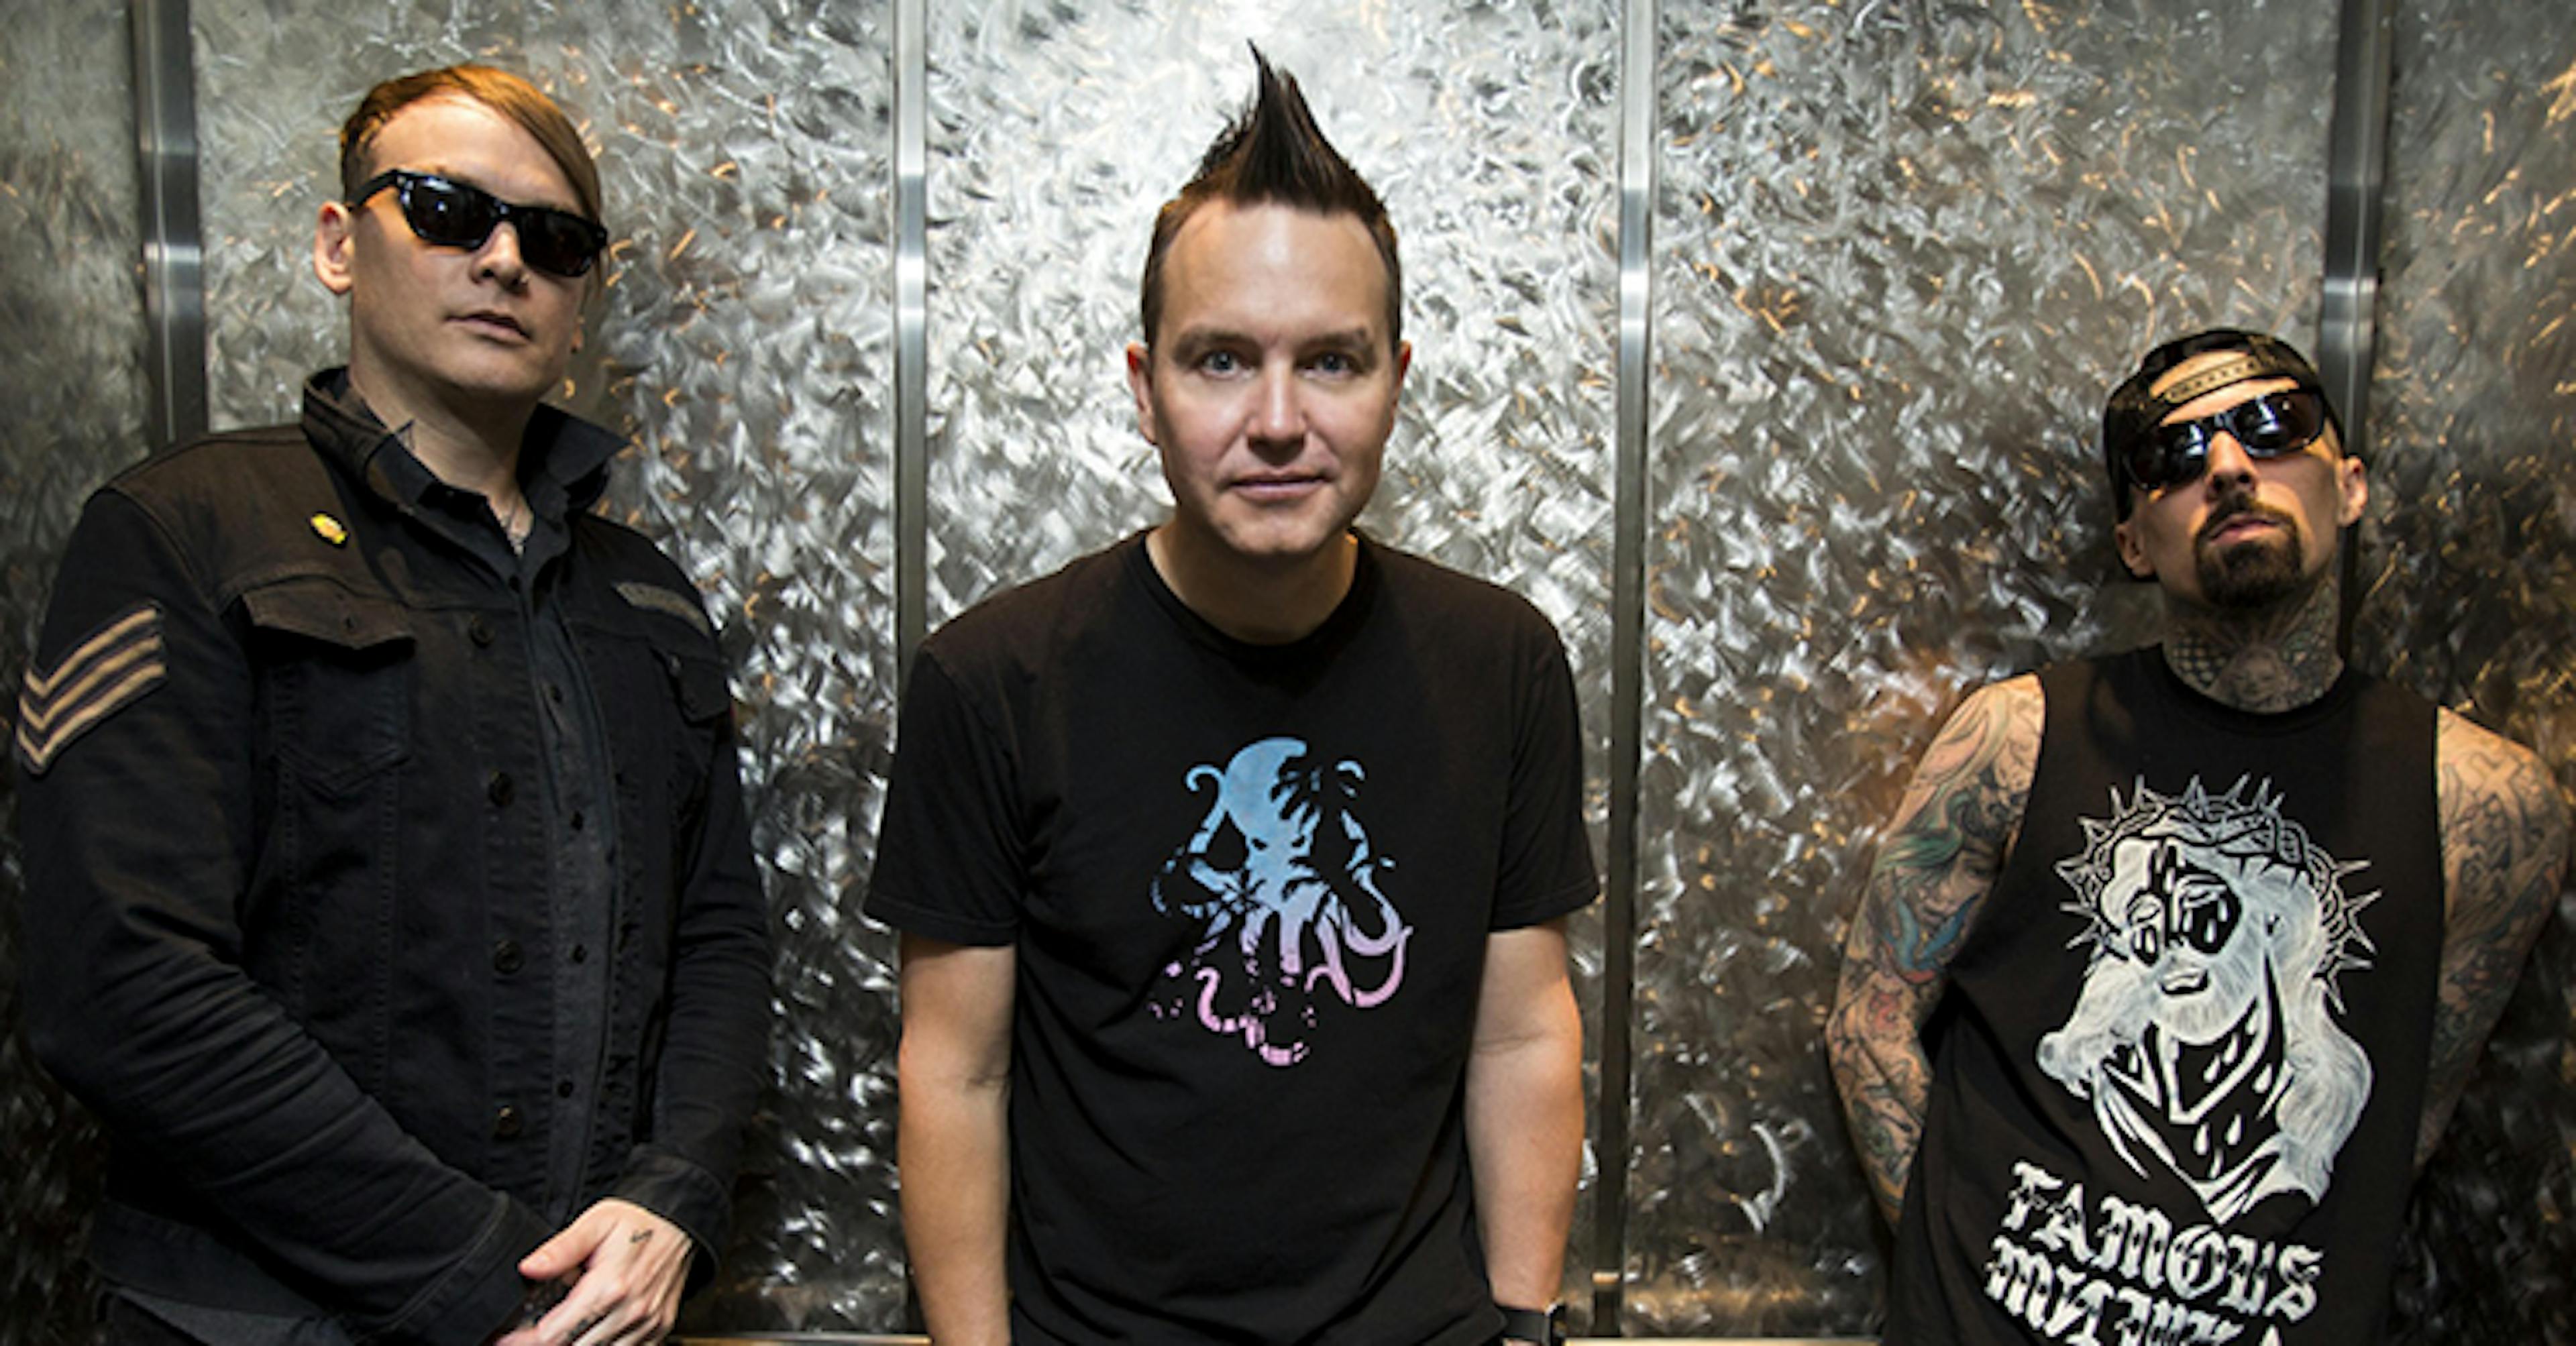 Watch The Matt Skiba Version Of Blink-182’s Home Is Such A Lonely Place